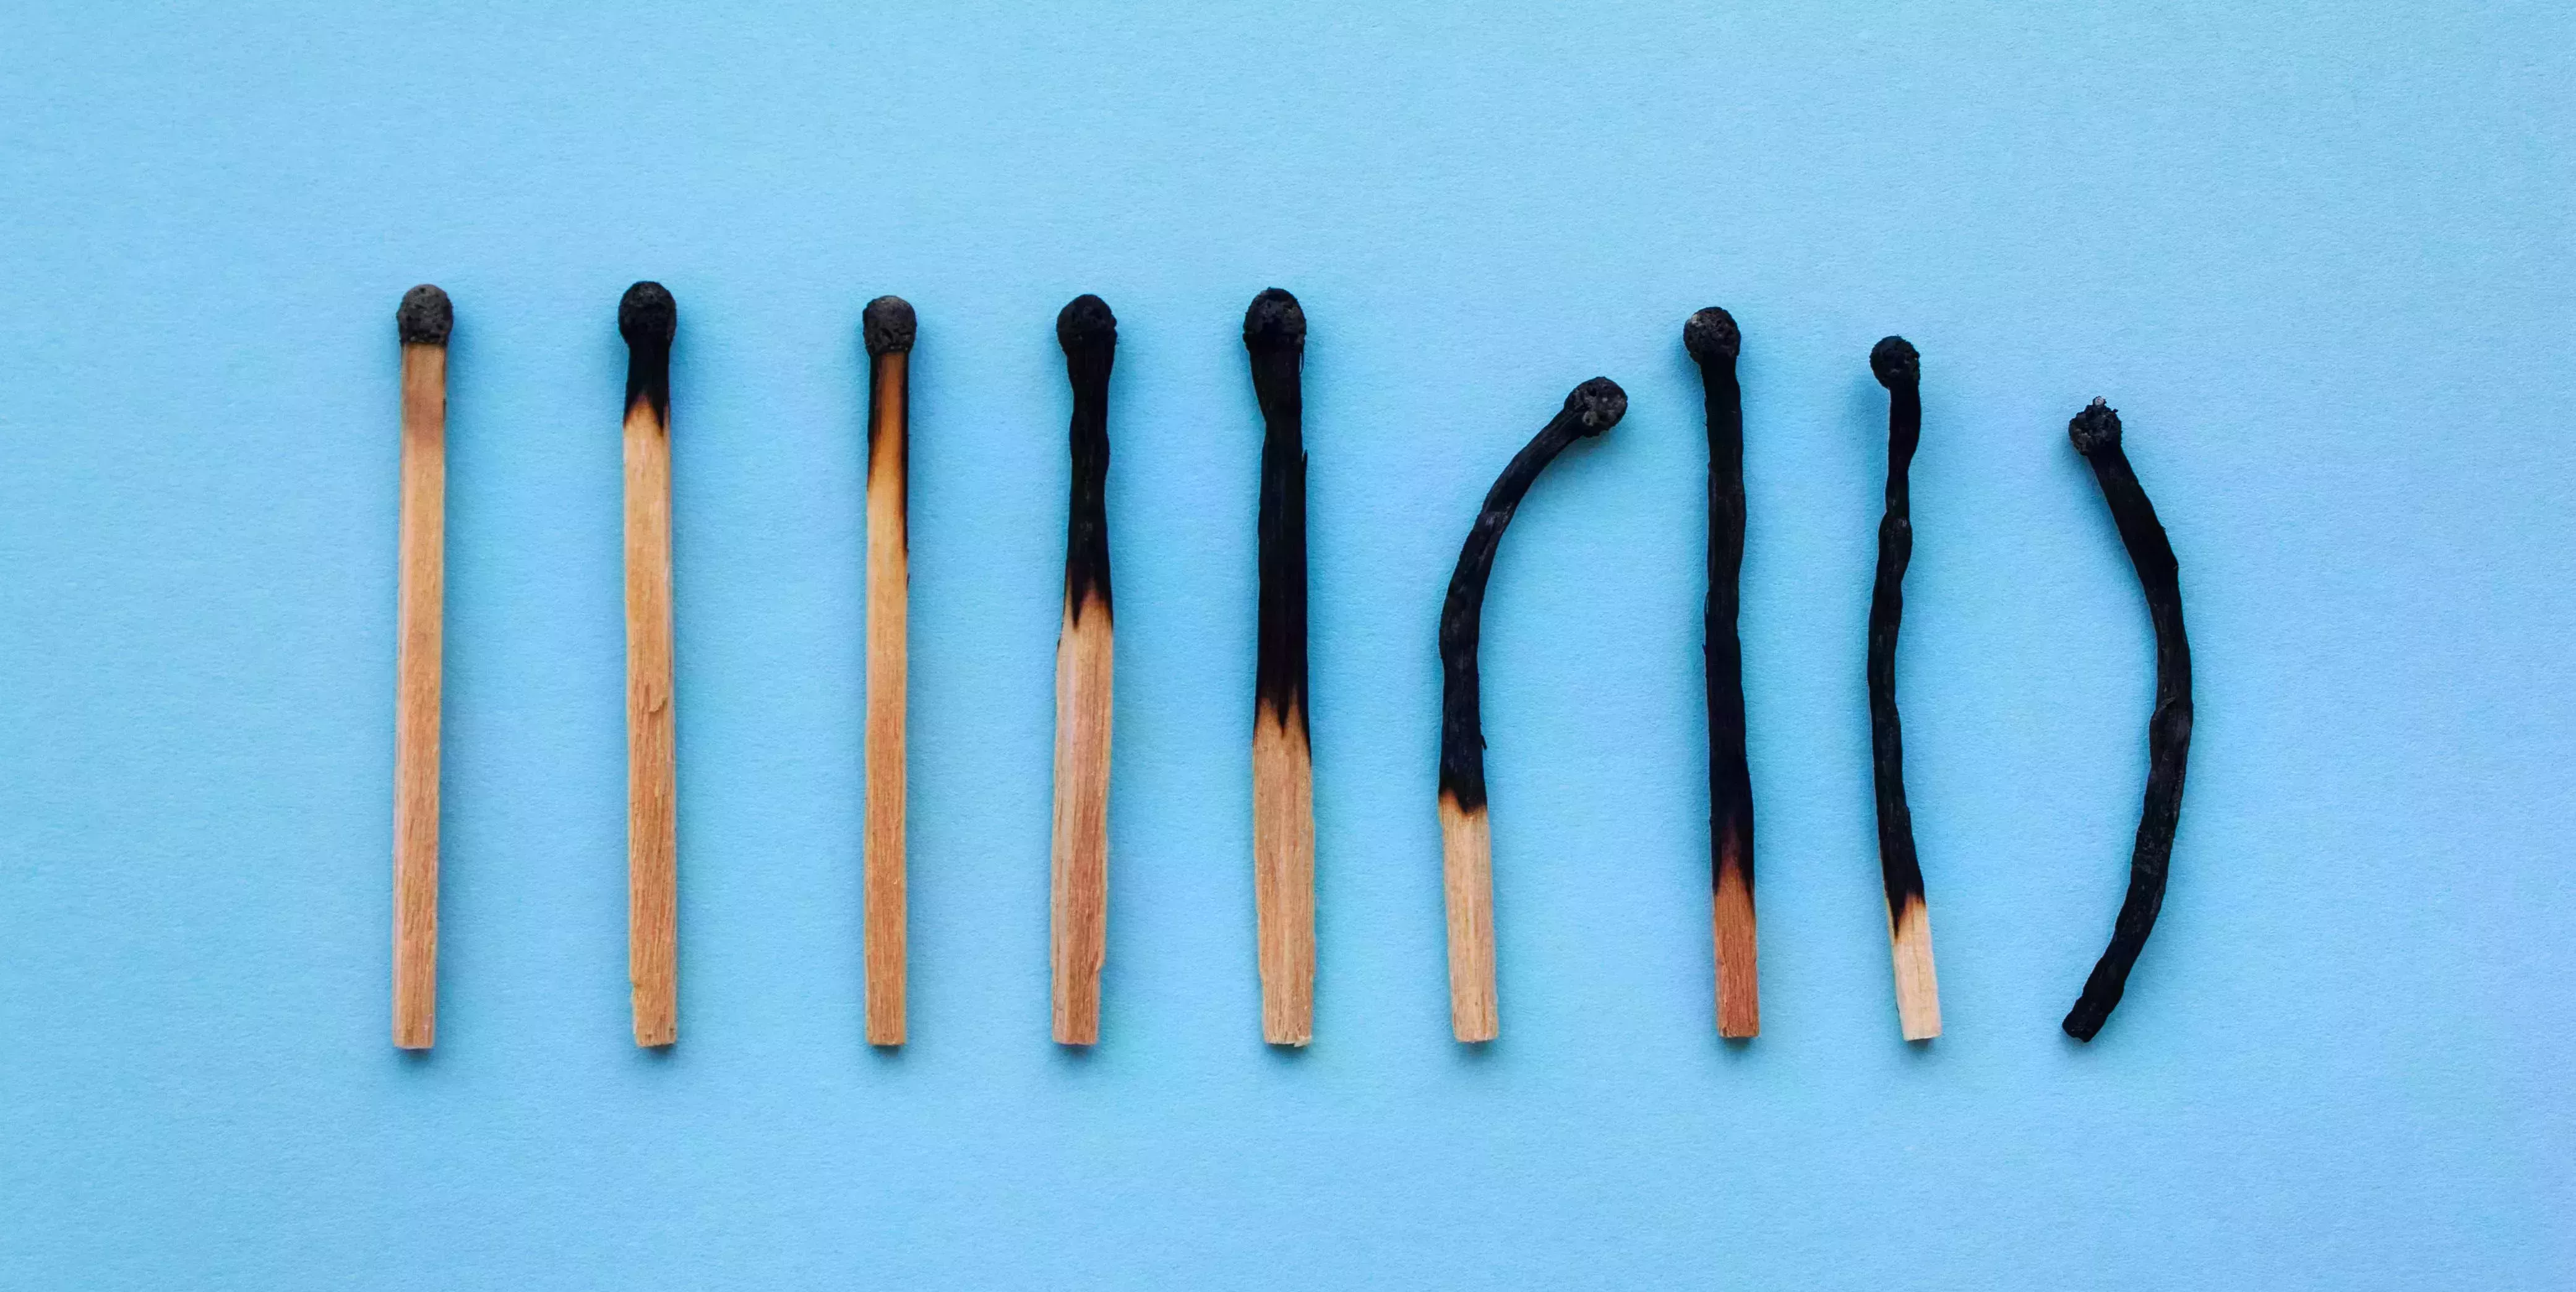 burned matches in a row on a blue background